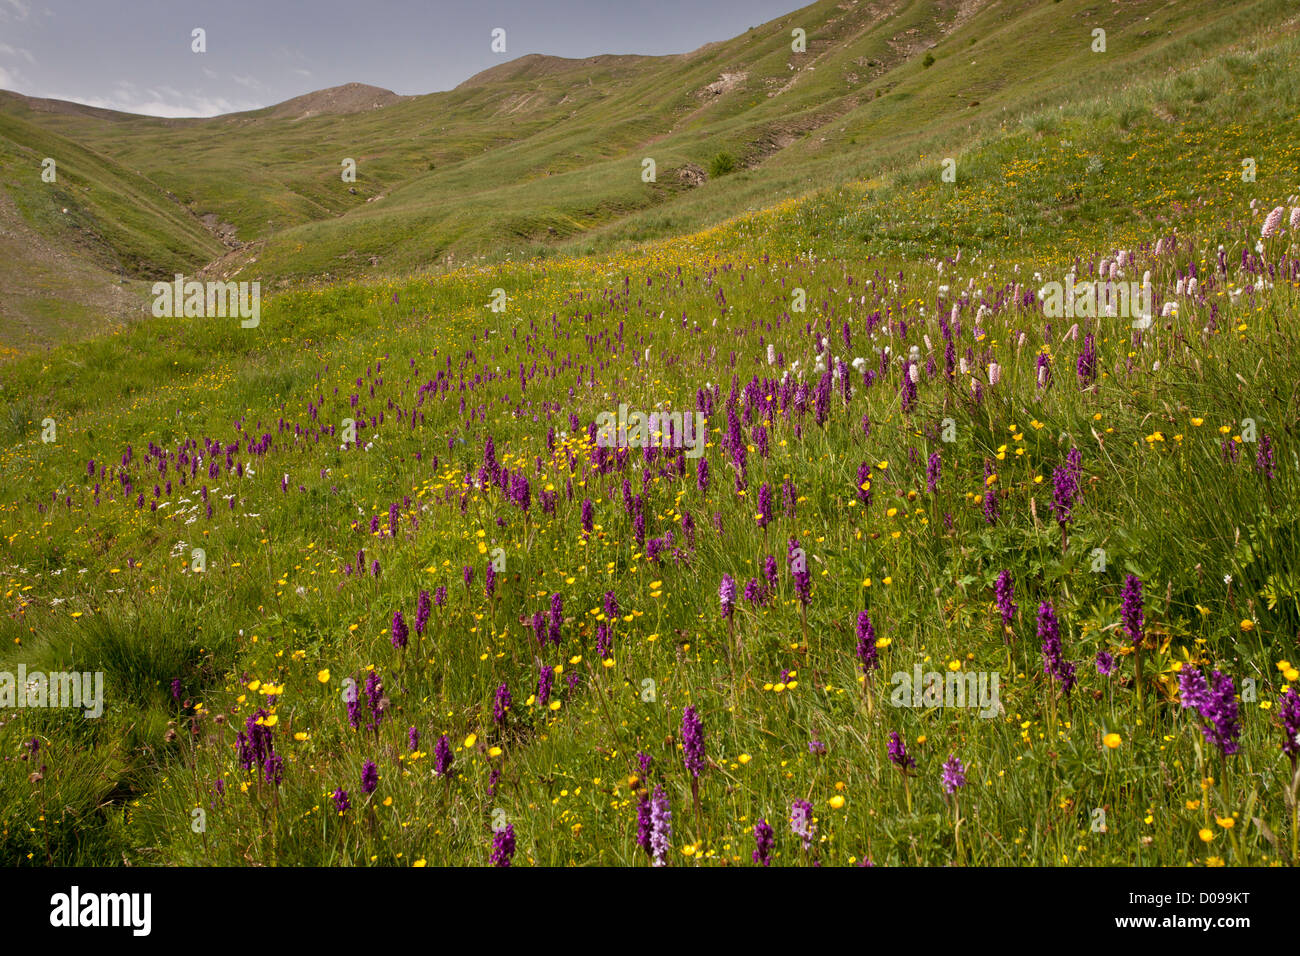 mass of orchids in wet flush, mainly marsh orchids (Dactylorhiza cruenta and D. majalis) Col d'Allos, Maritime Alps, France Stock Photo